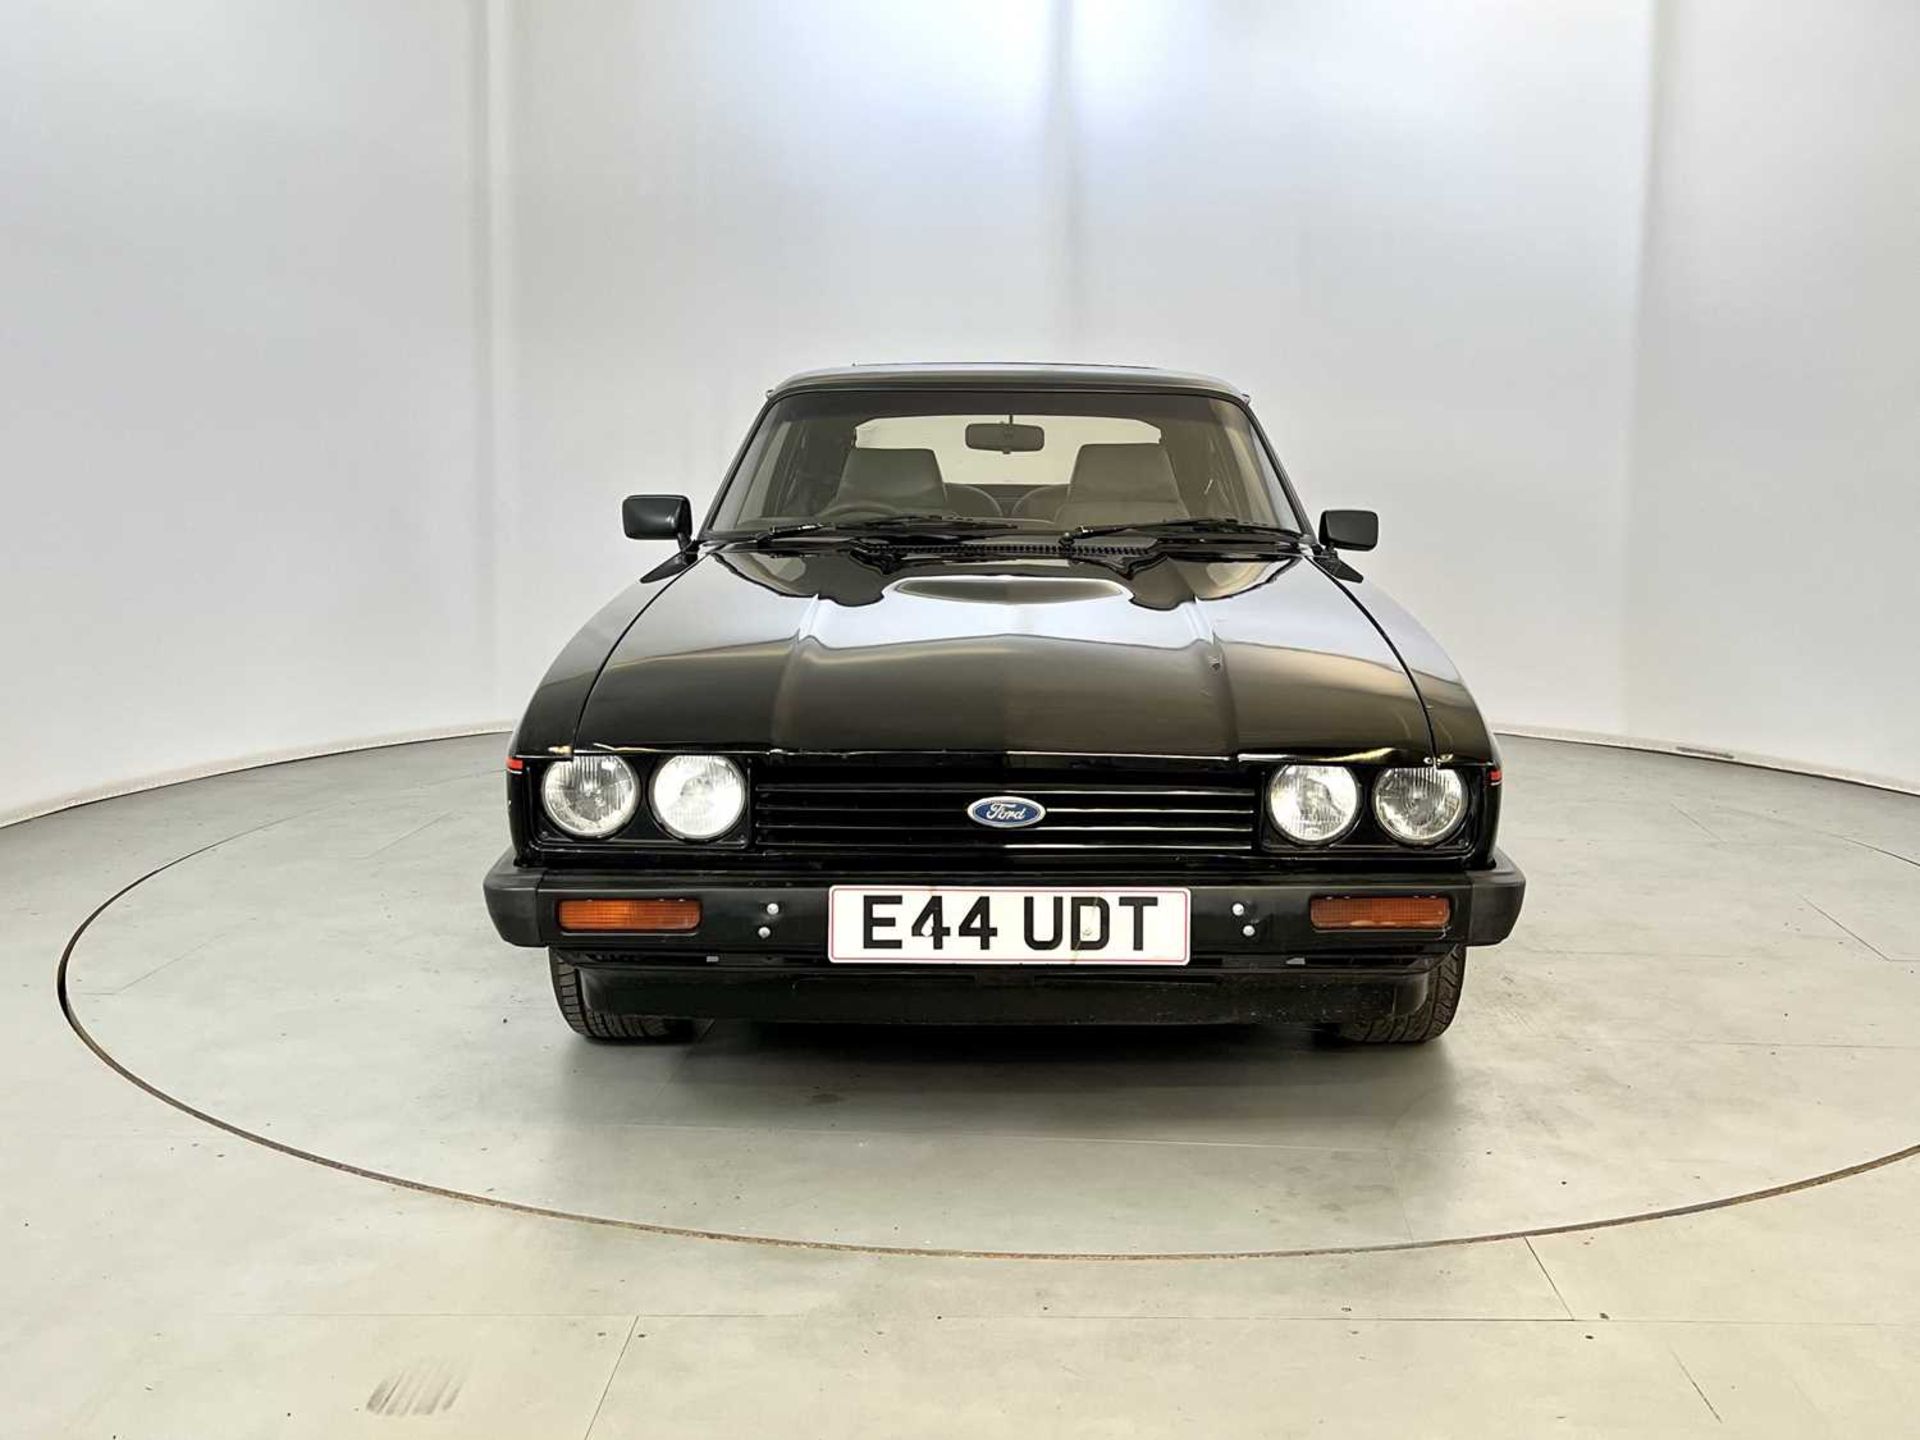 1987 Ford Capri 2.8 Injection - Image 2 of 28